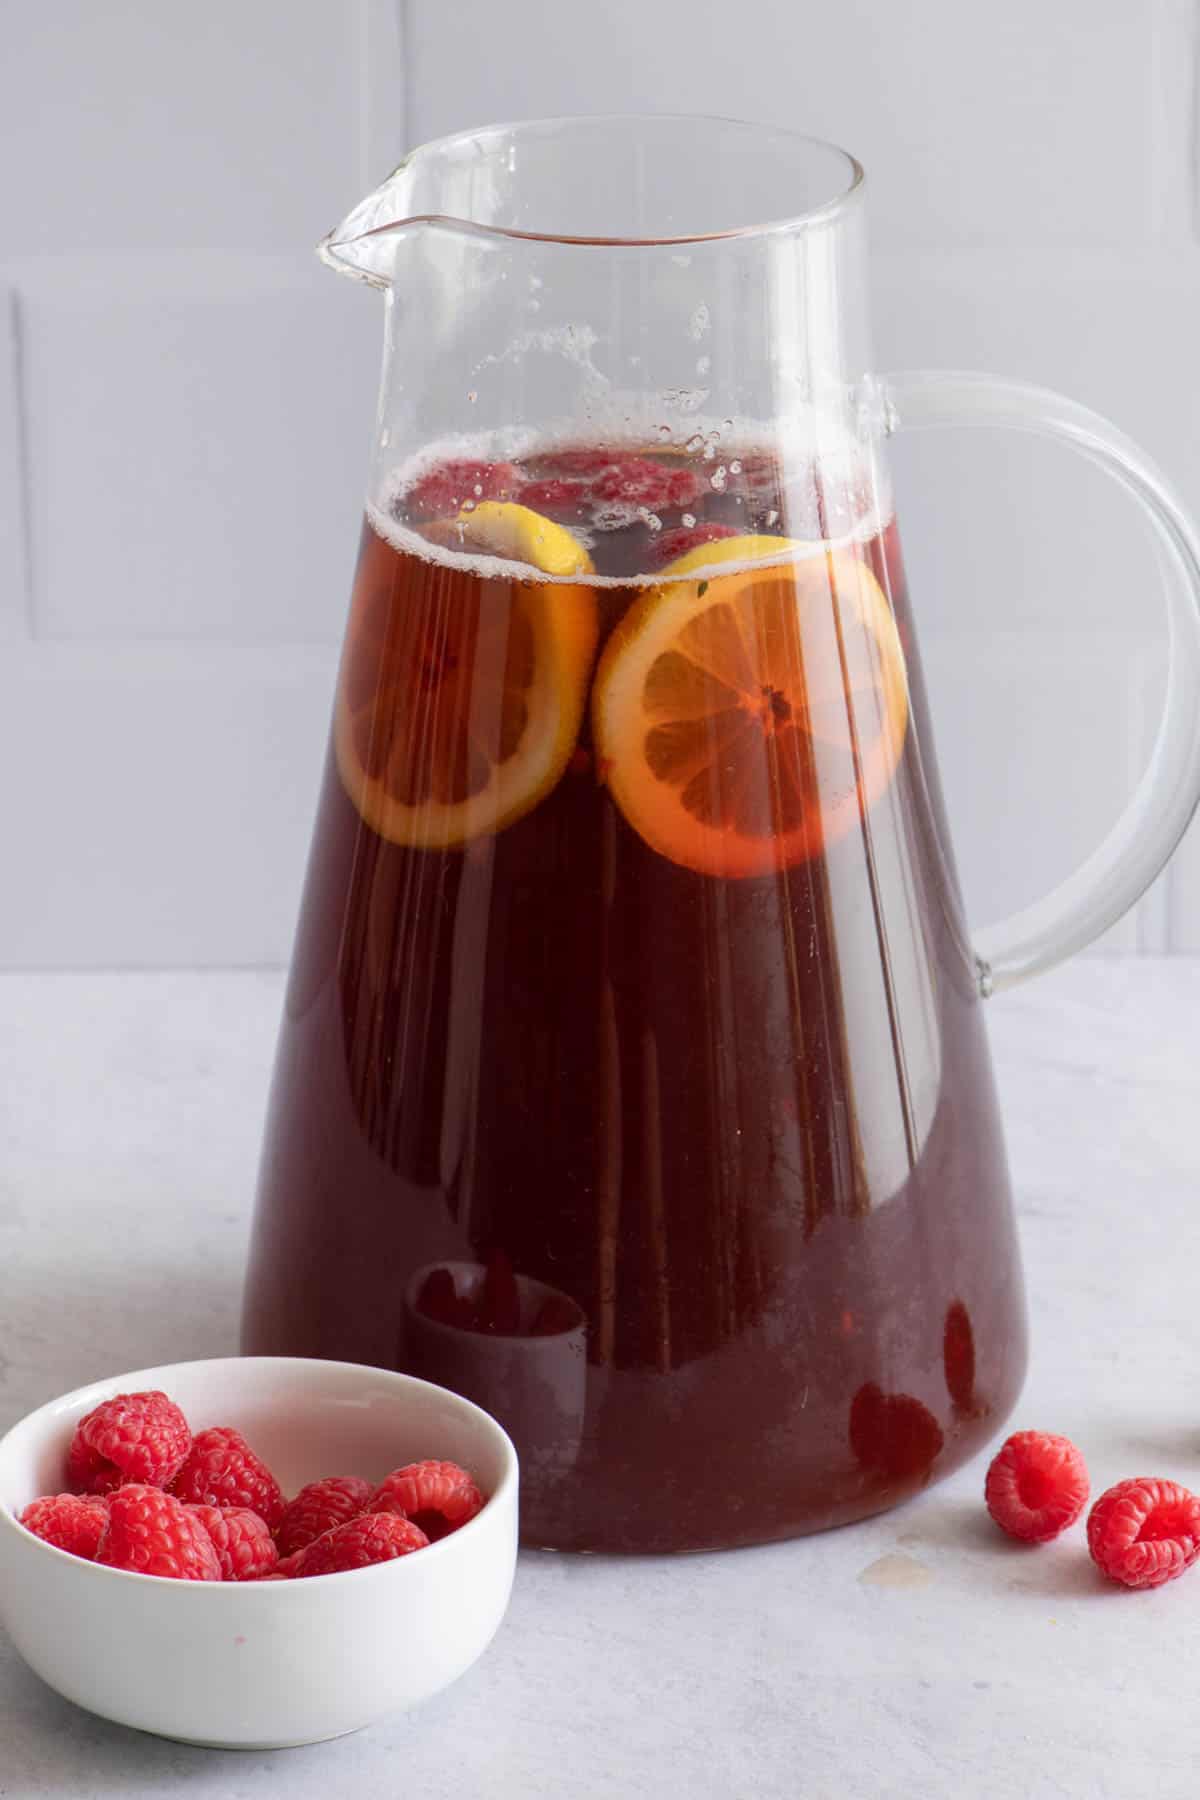 Large pitcher of raspberry tea with a halved lemon inside and a small bowl of fresh raspberries.